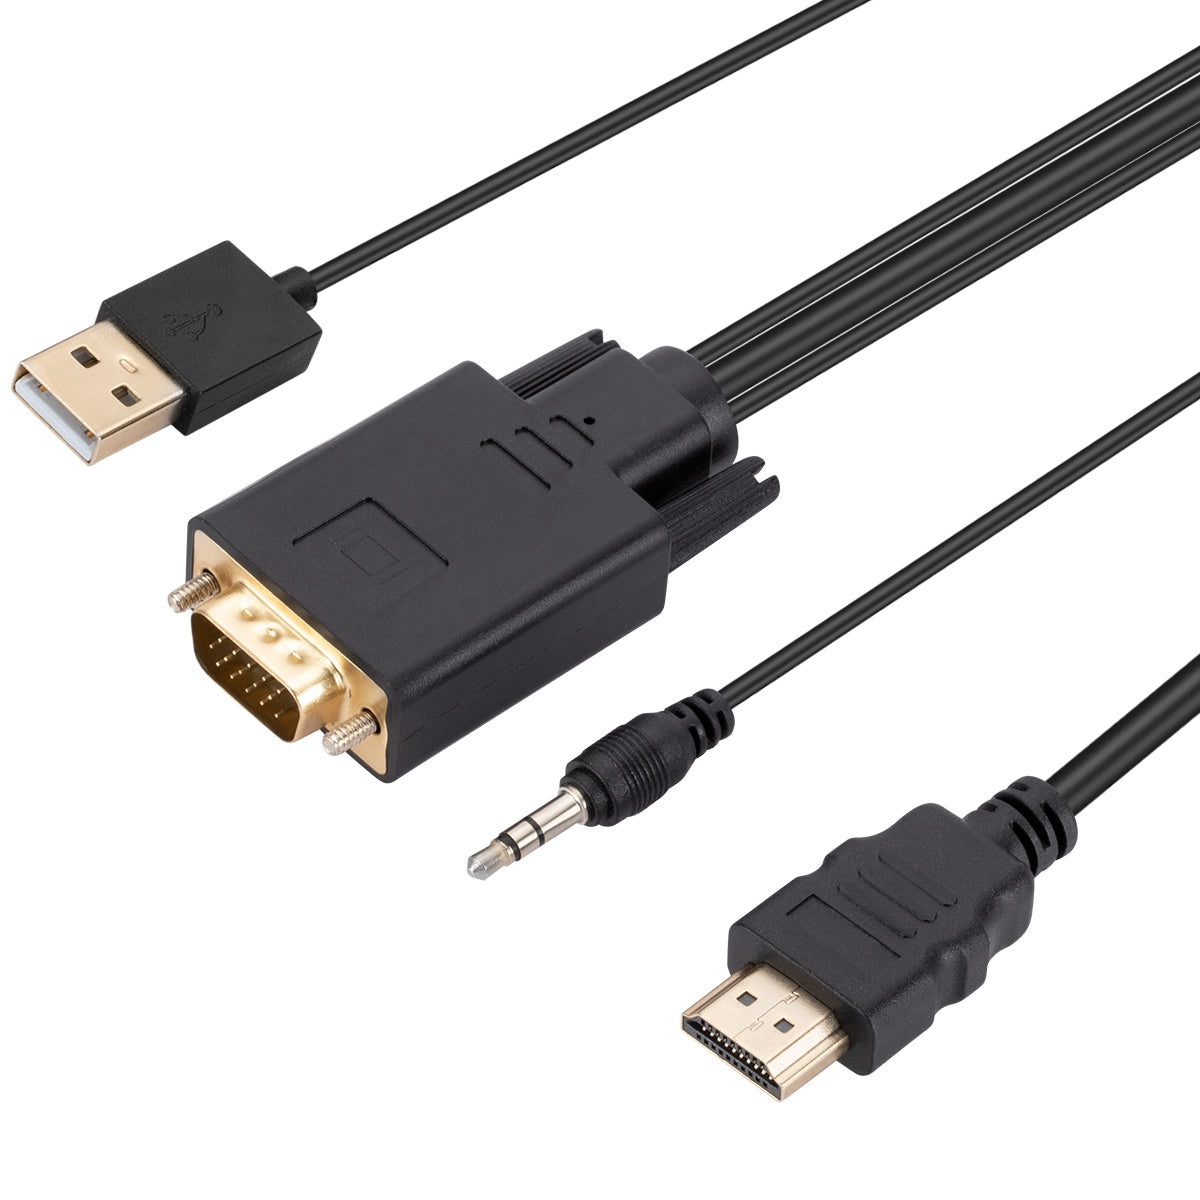 1.8m VGA to HDMI Adapter Cable with Audio, USB Power Cables, Portable VGA to HDMI Converter for Monitor with VGA, Projector, TV